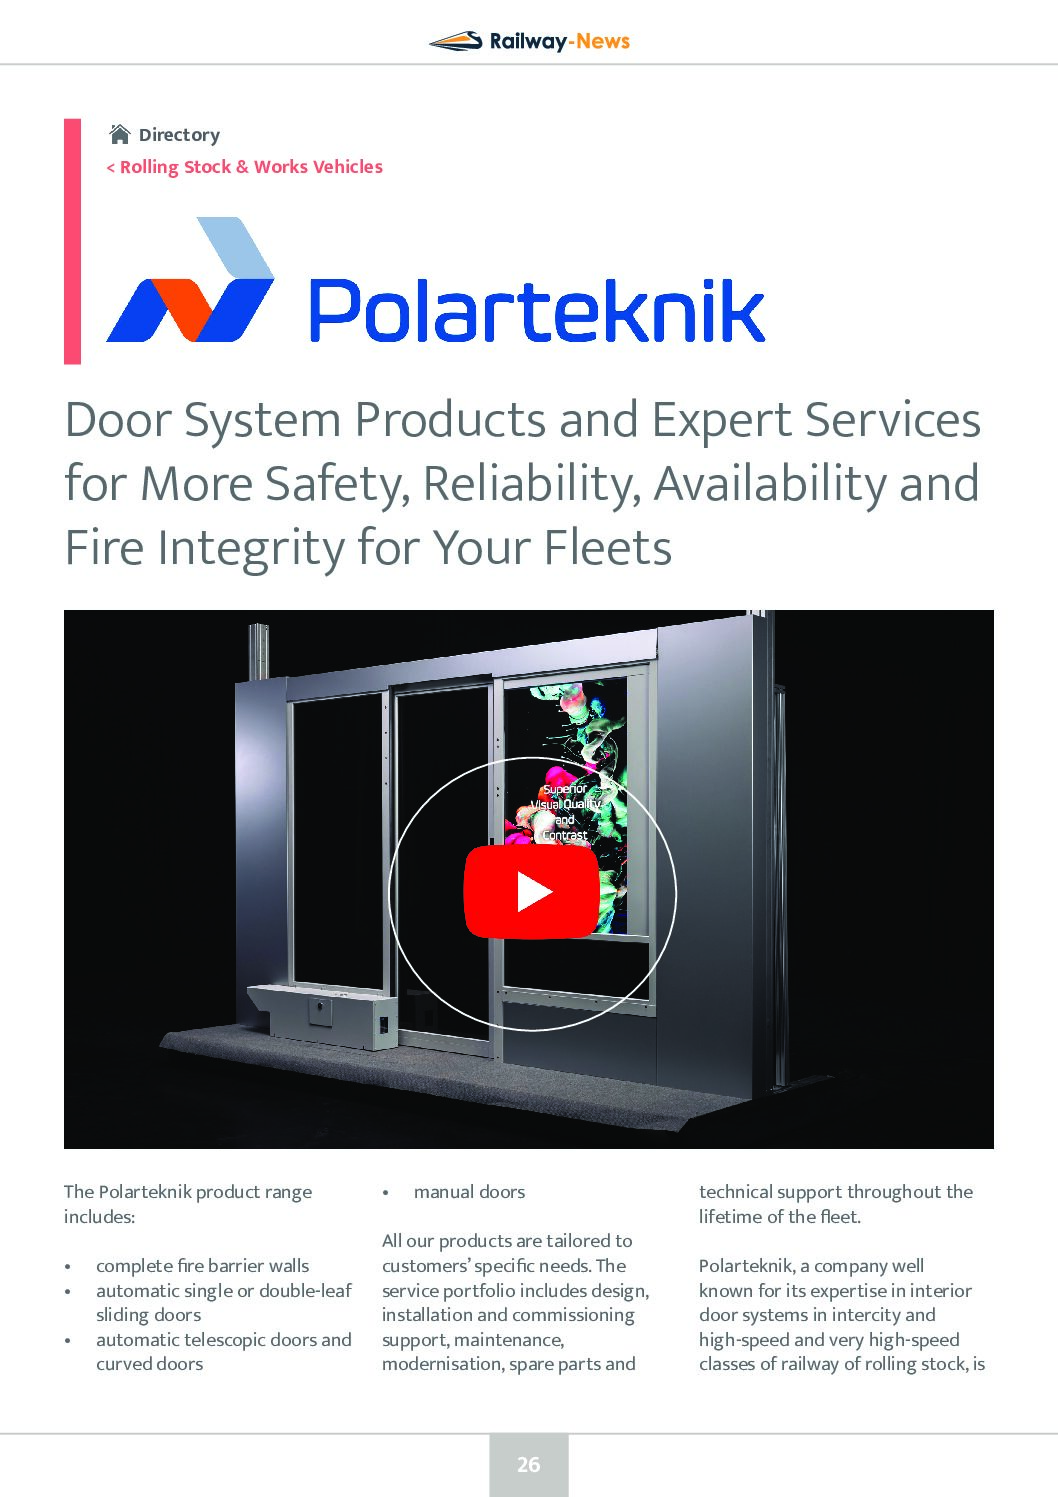 Door System Products and Expert Services for Your Fleets